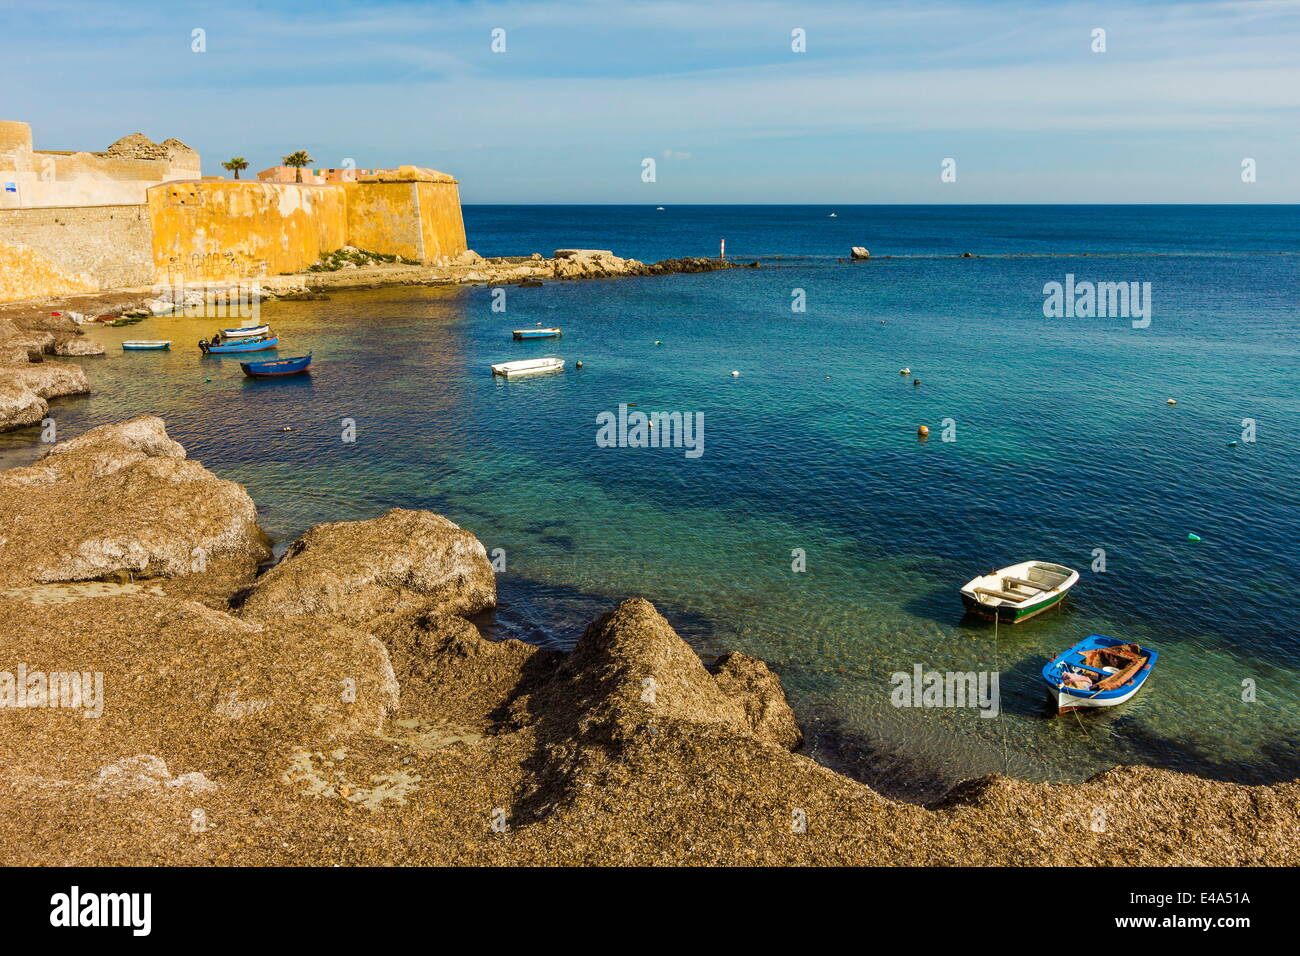 Cove and city walls seen from Via Mura Di Tramontana Ovest on sea front of this northwest fishing port, Trapani, Sicily, Italy Stock Photo